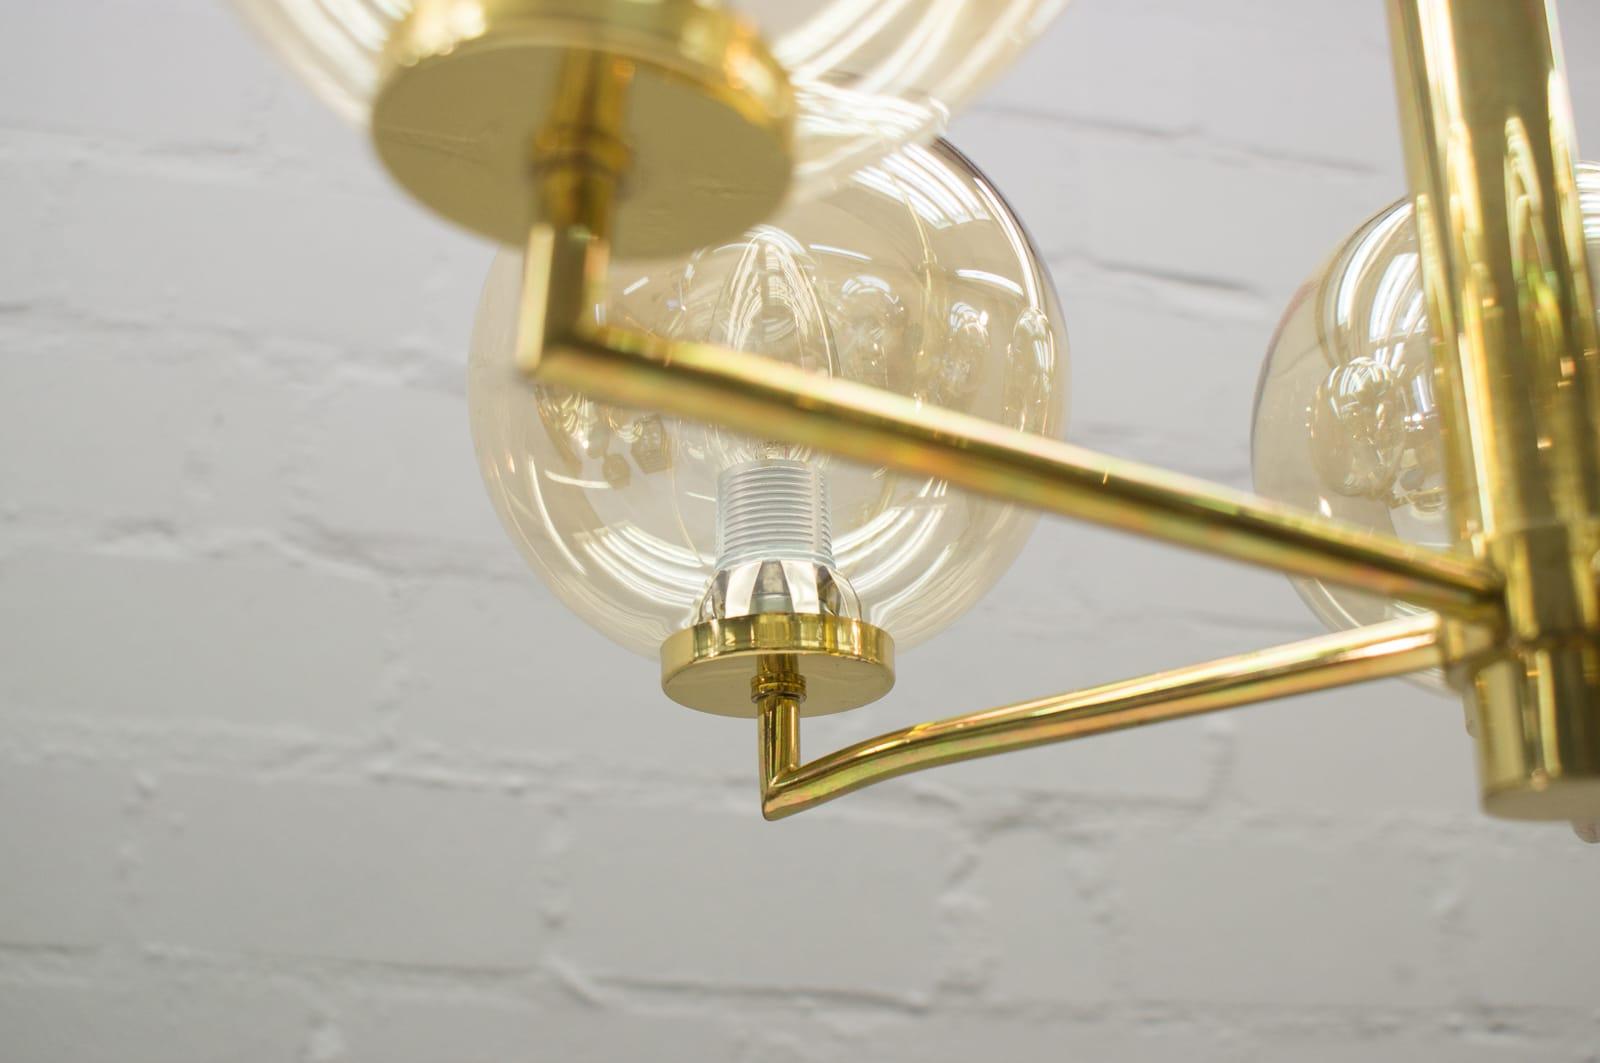 Space Age Orbit Ceiling Lamp with Five Amber Glass Balls, 1960s For Sale 2